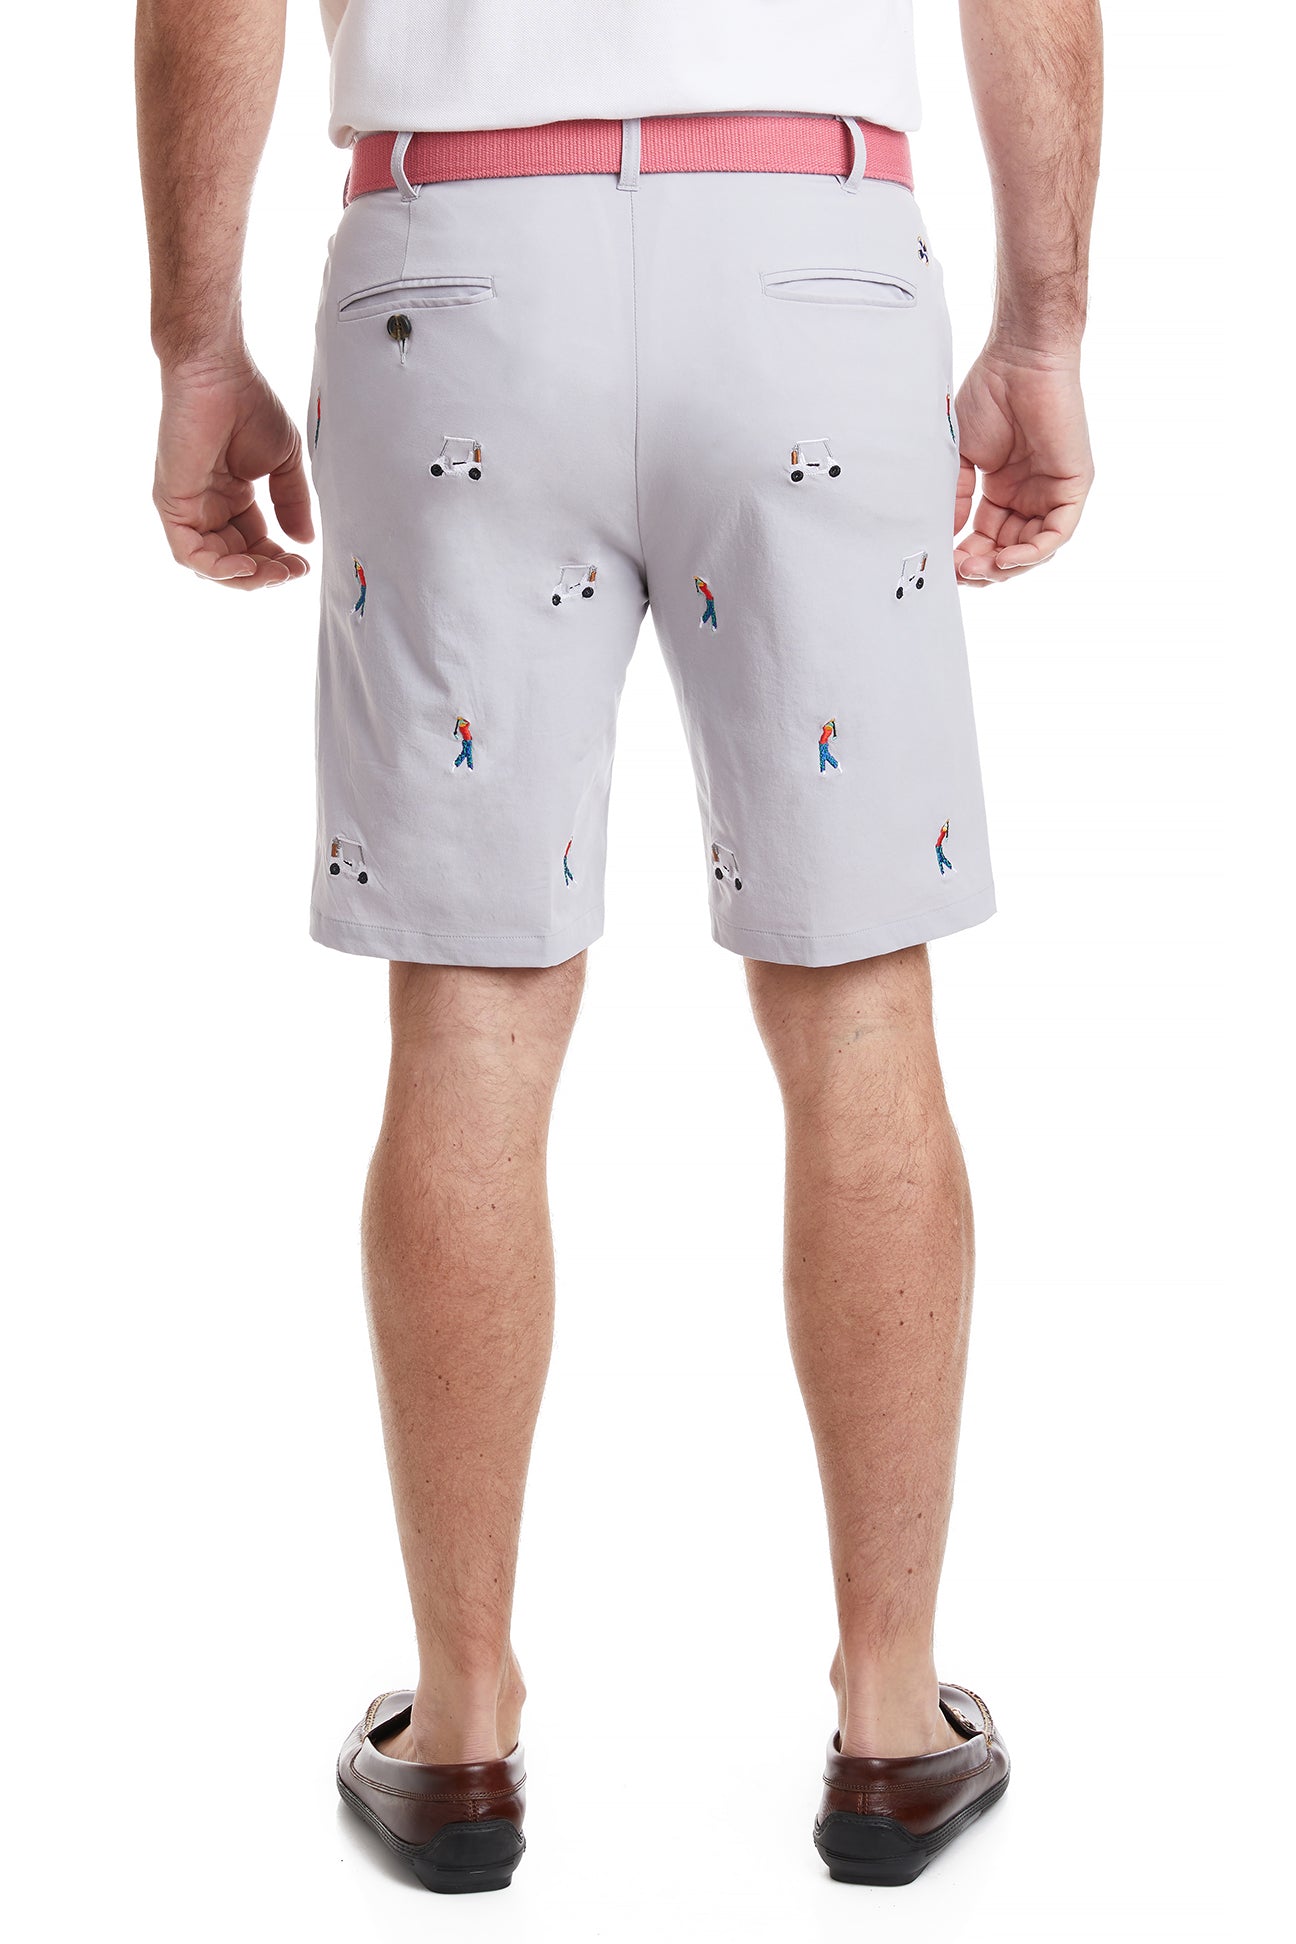 ACKformance Short Stone with Golf Cart and Golfer MENS EMBROIDERED SHORTS Castaway Nantucket Island